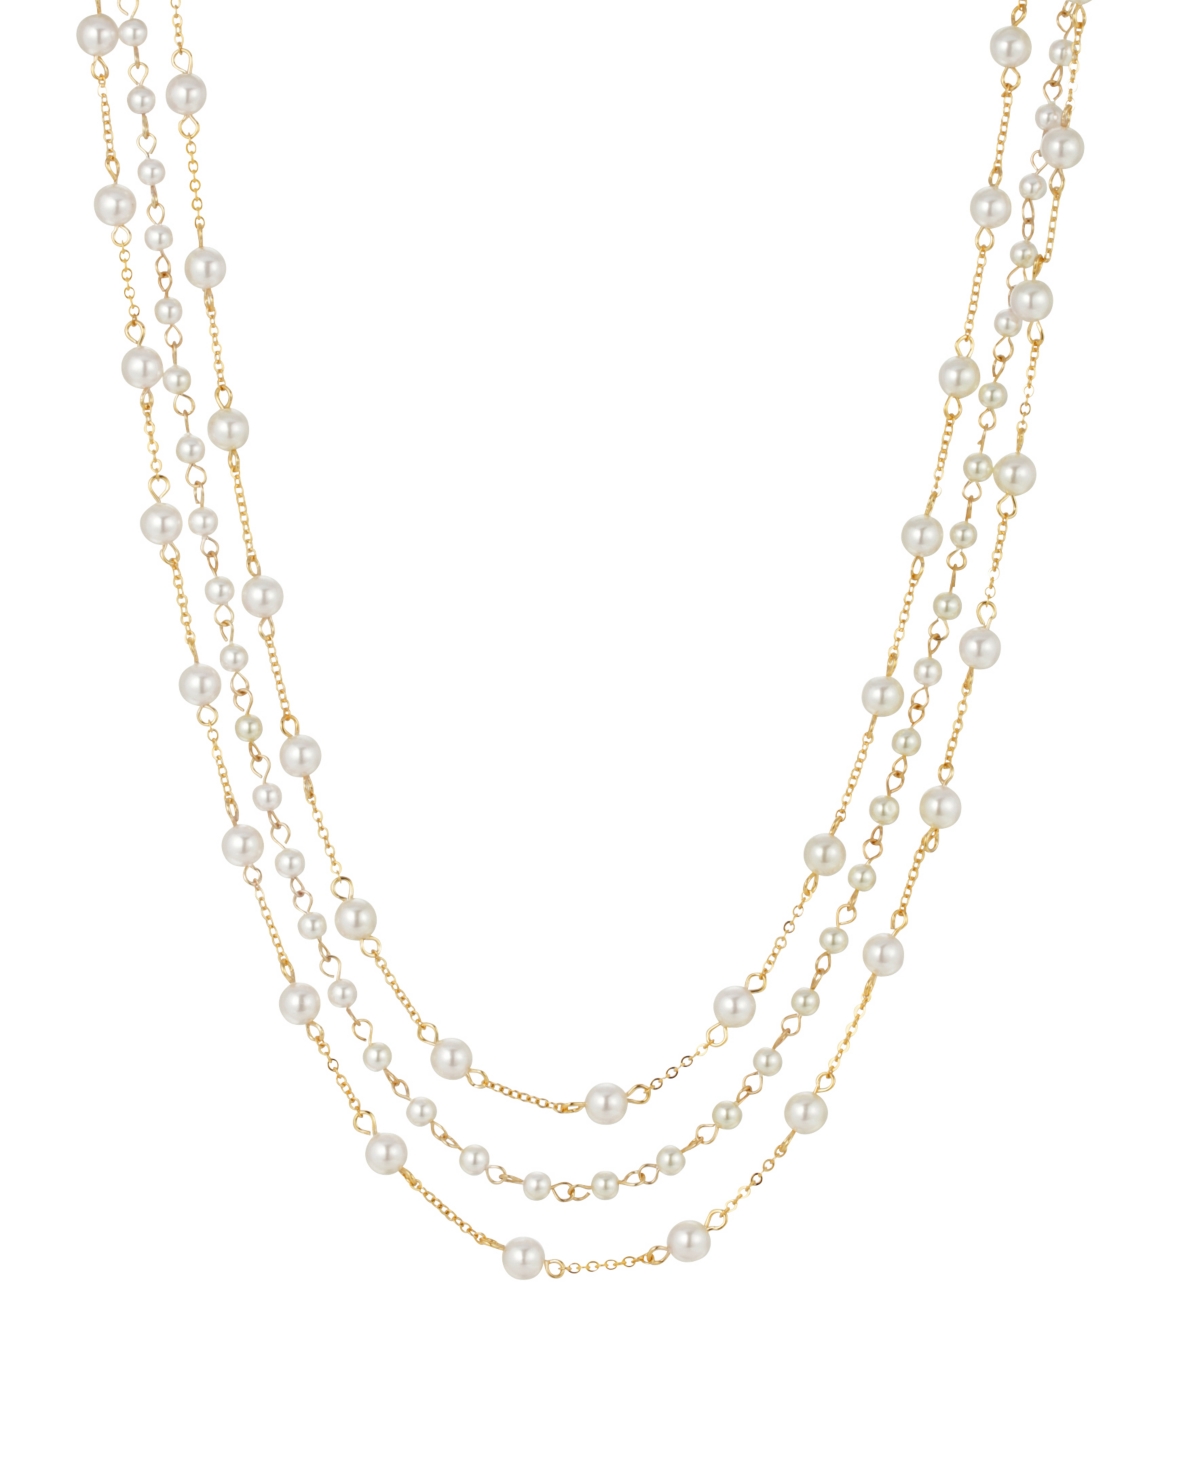 2028 Women's Gold Tone Three Strand Imitation Pearl Chain Necklace In White